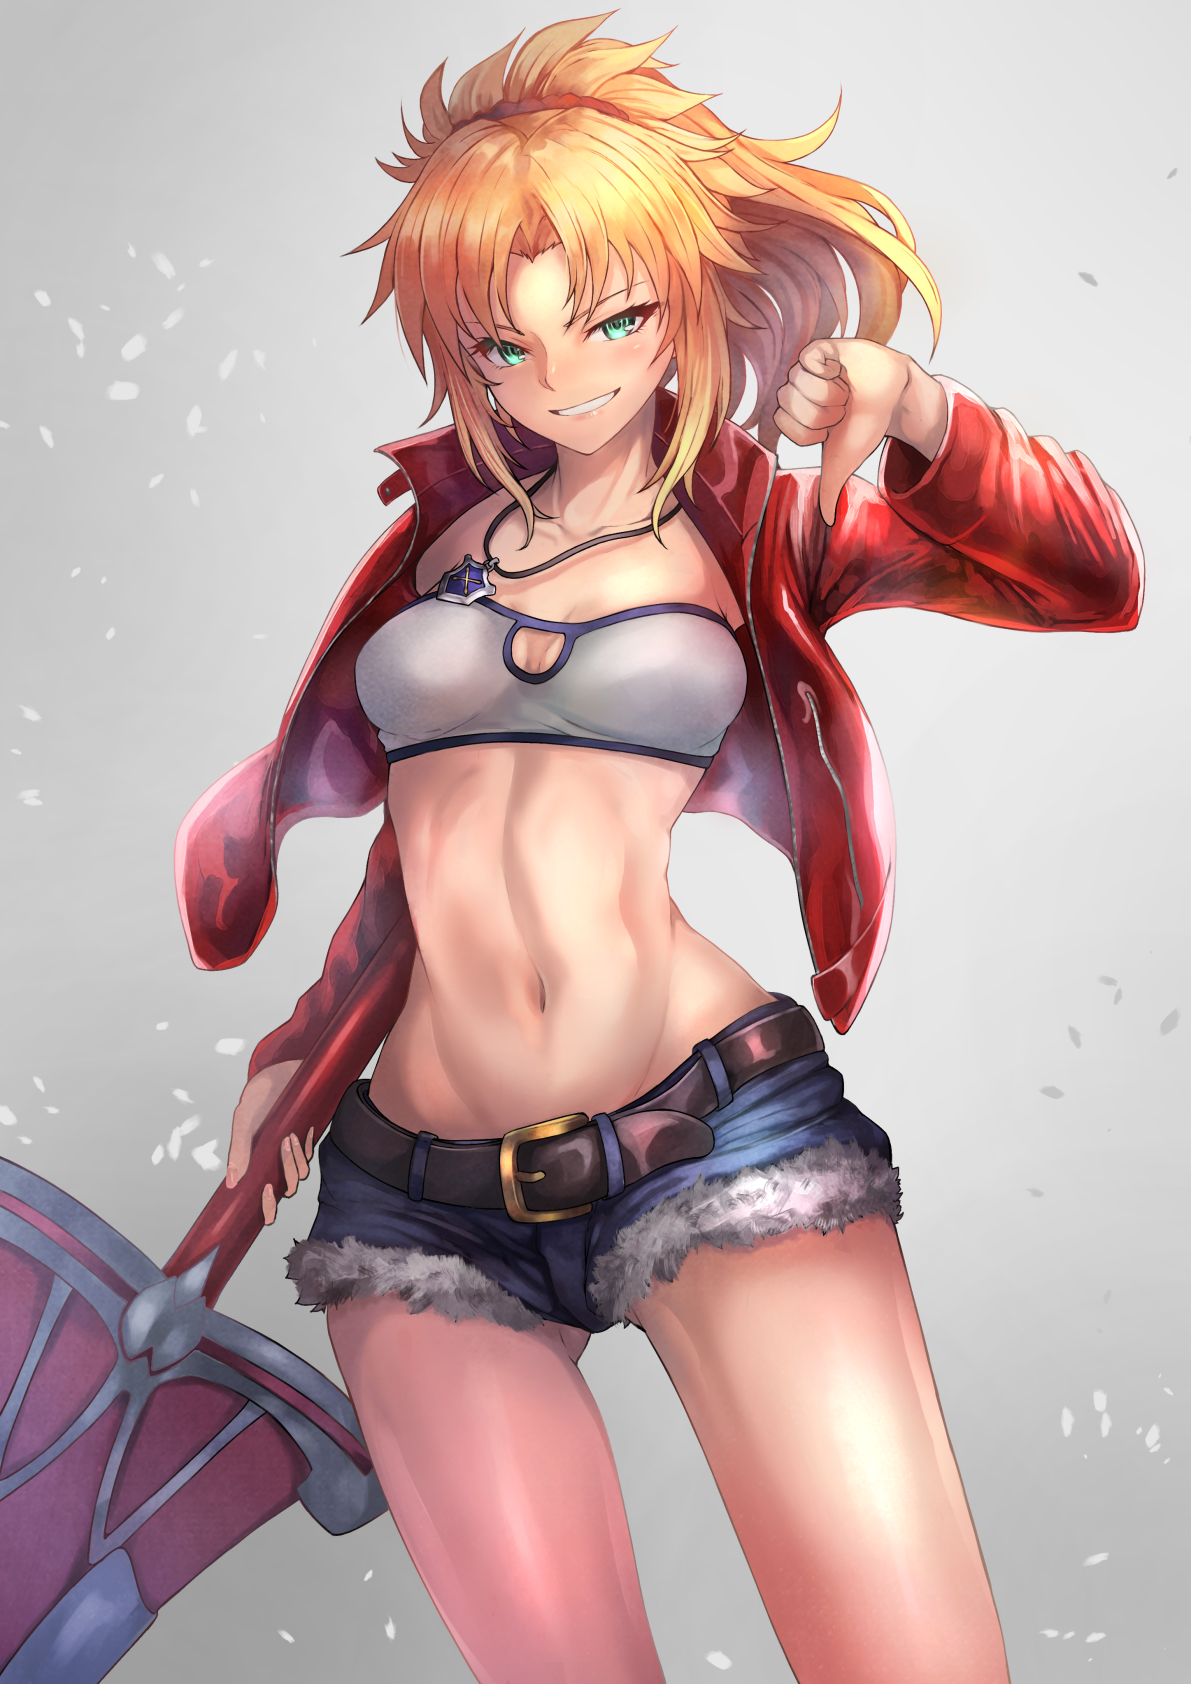 Anime 1191x1684 Mordred (Fate/Apocrypha) anime anime girls portrait display digital art artwork blonde ponytail smiling Fate/Grand Order Fate/Apocrypha  jean shorts red jackets Fate series short shorts crop top open jacket green eyes Ohako